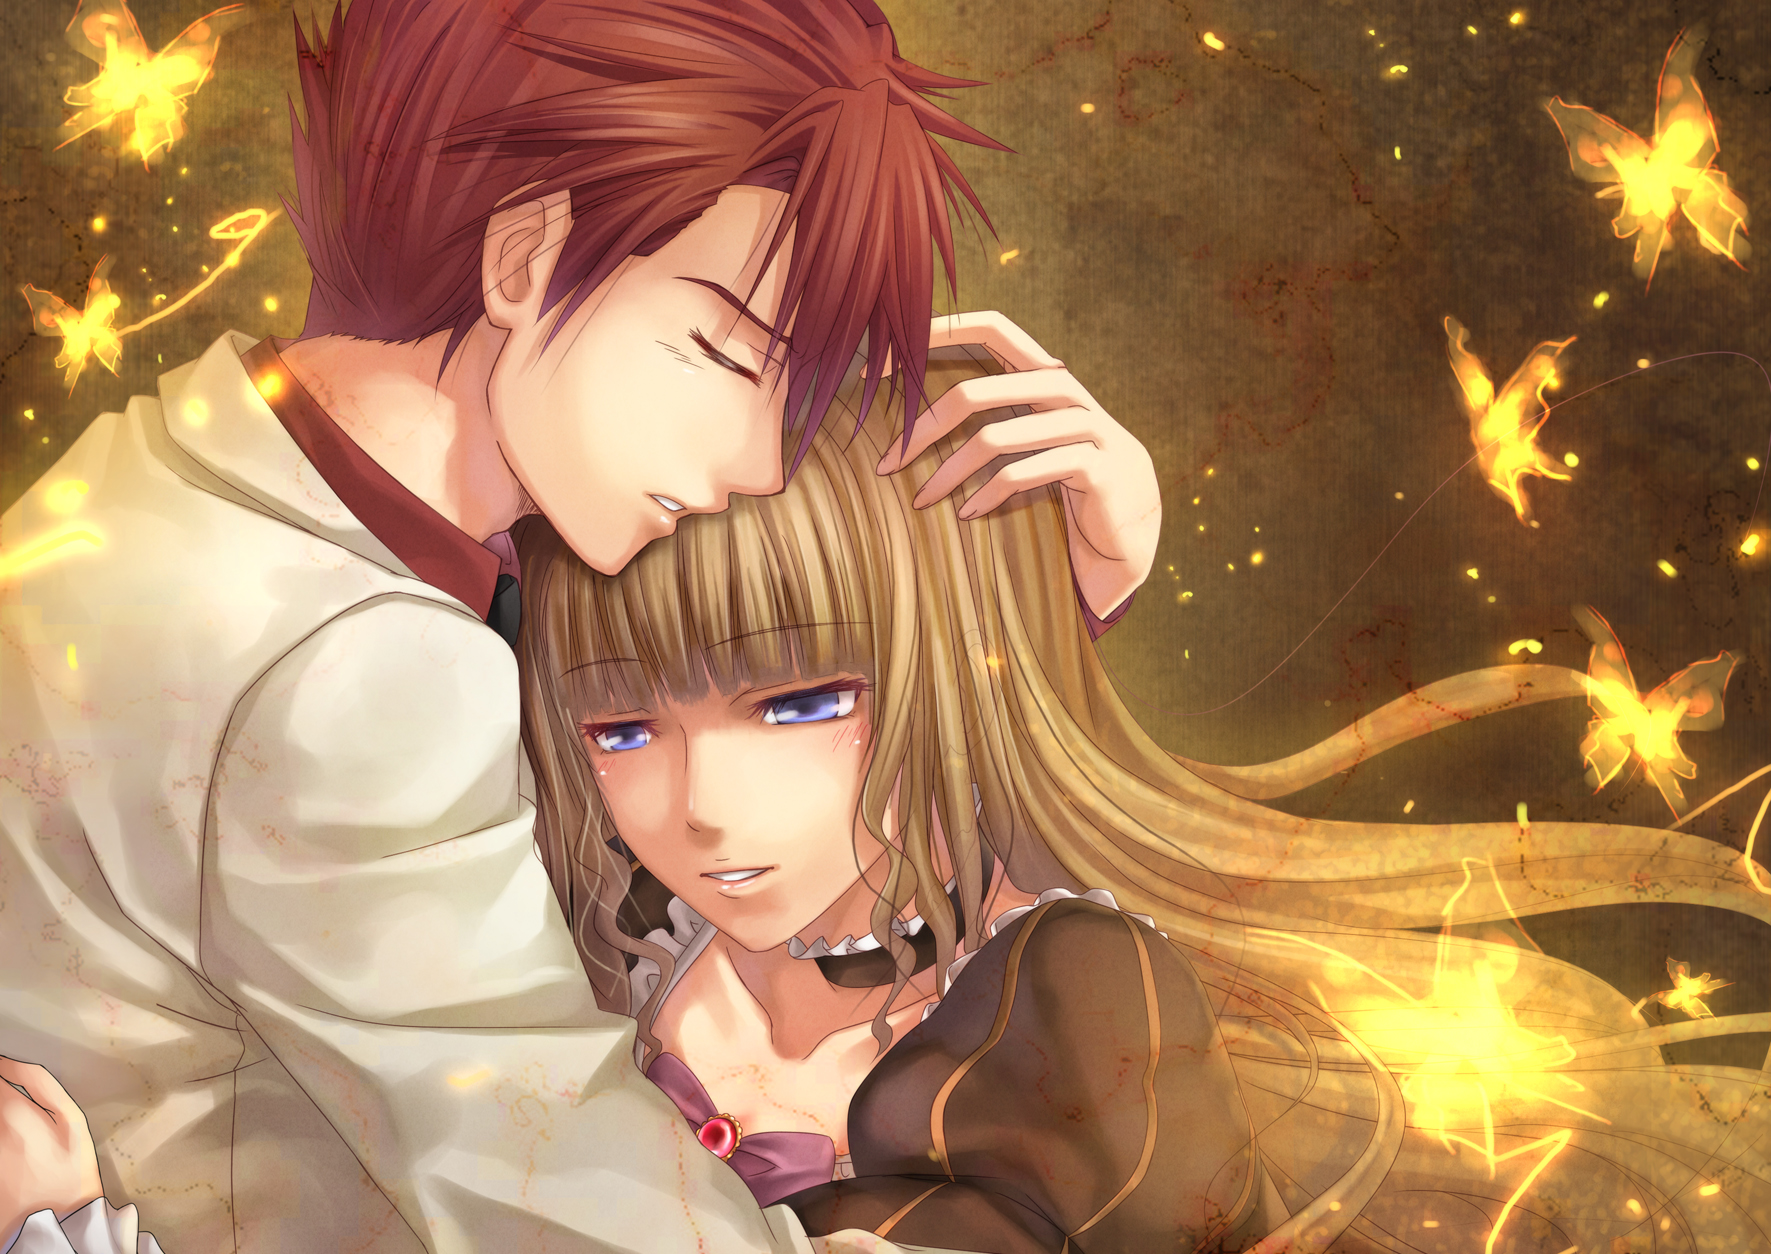 Hold Me - a captivating anime desktop wallpaper from Umineko: When They Cry.